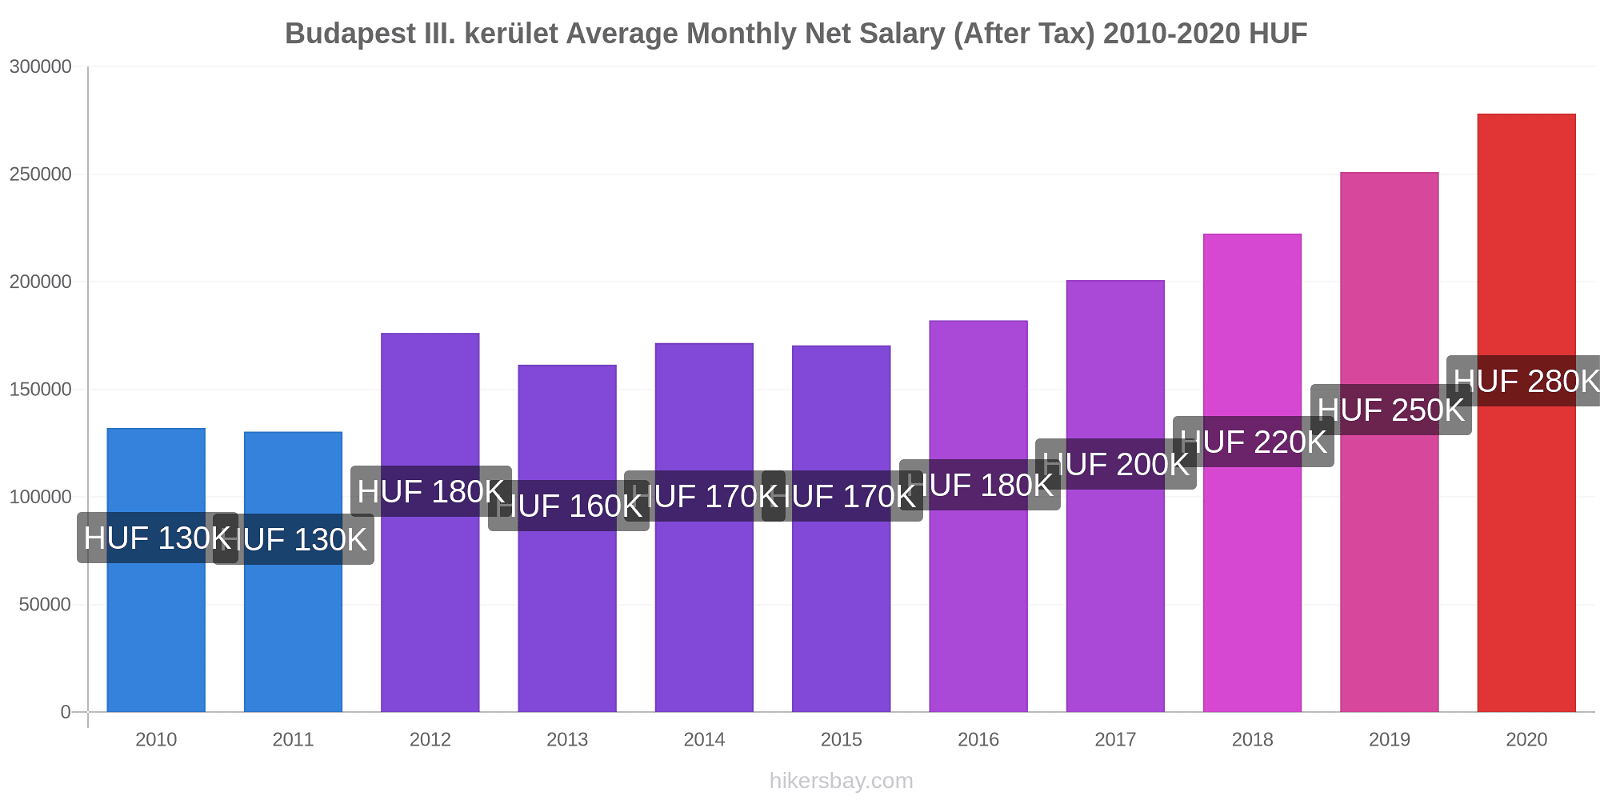 Budapest III. kerület price changes Average Monthly Net Salary (After Tax) hikersbay.com